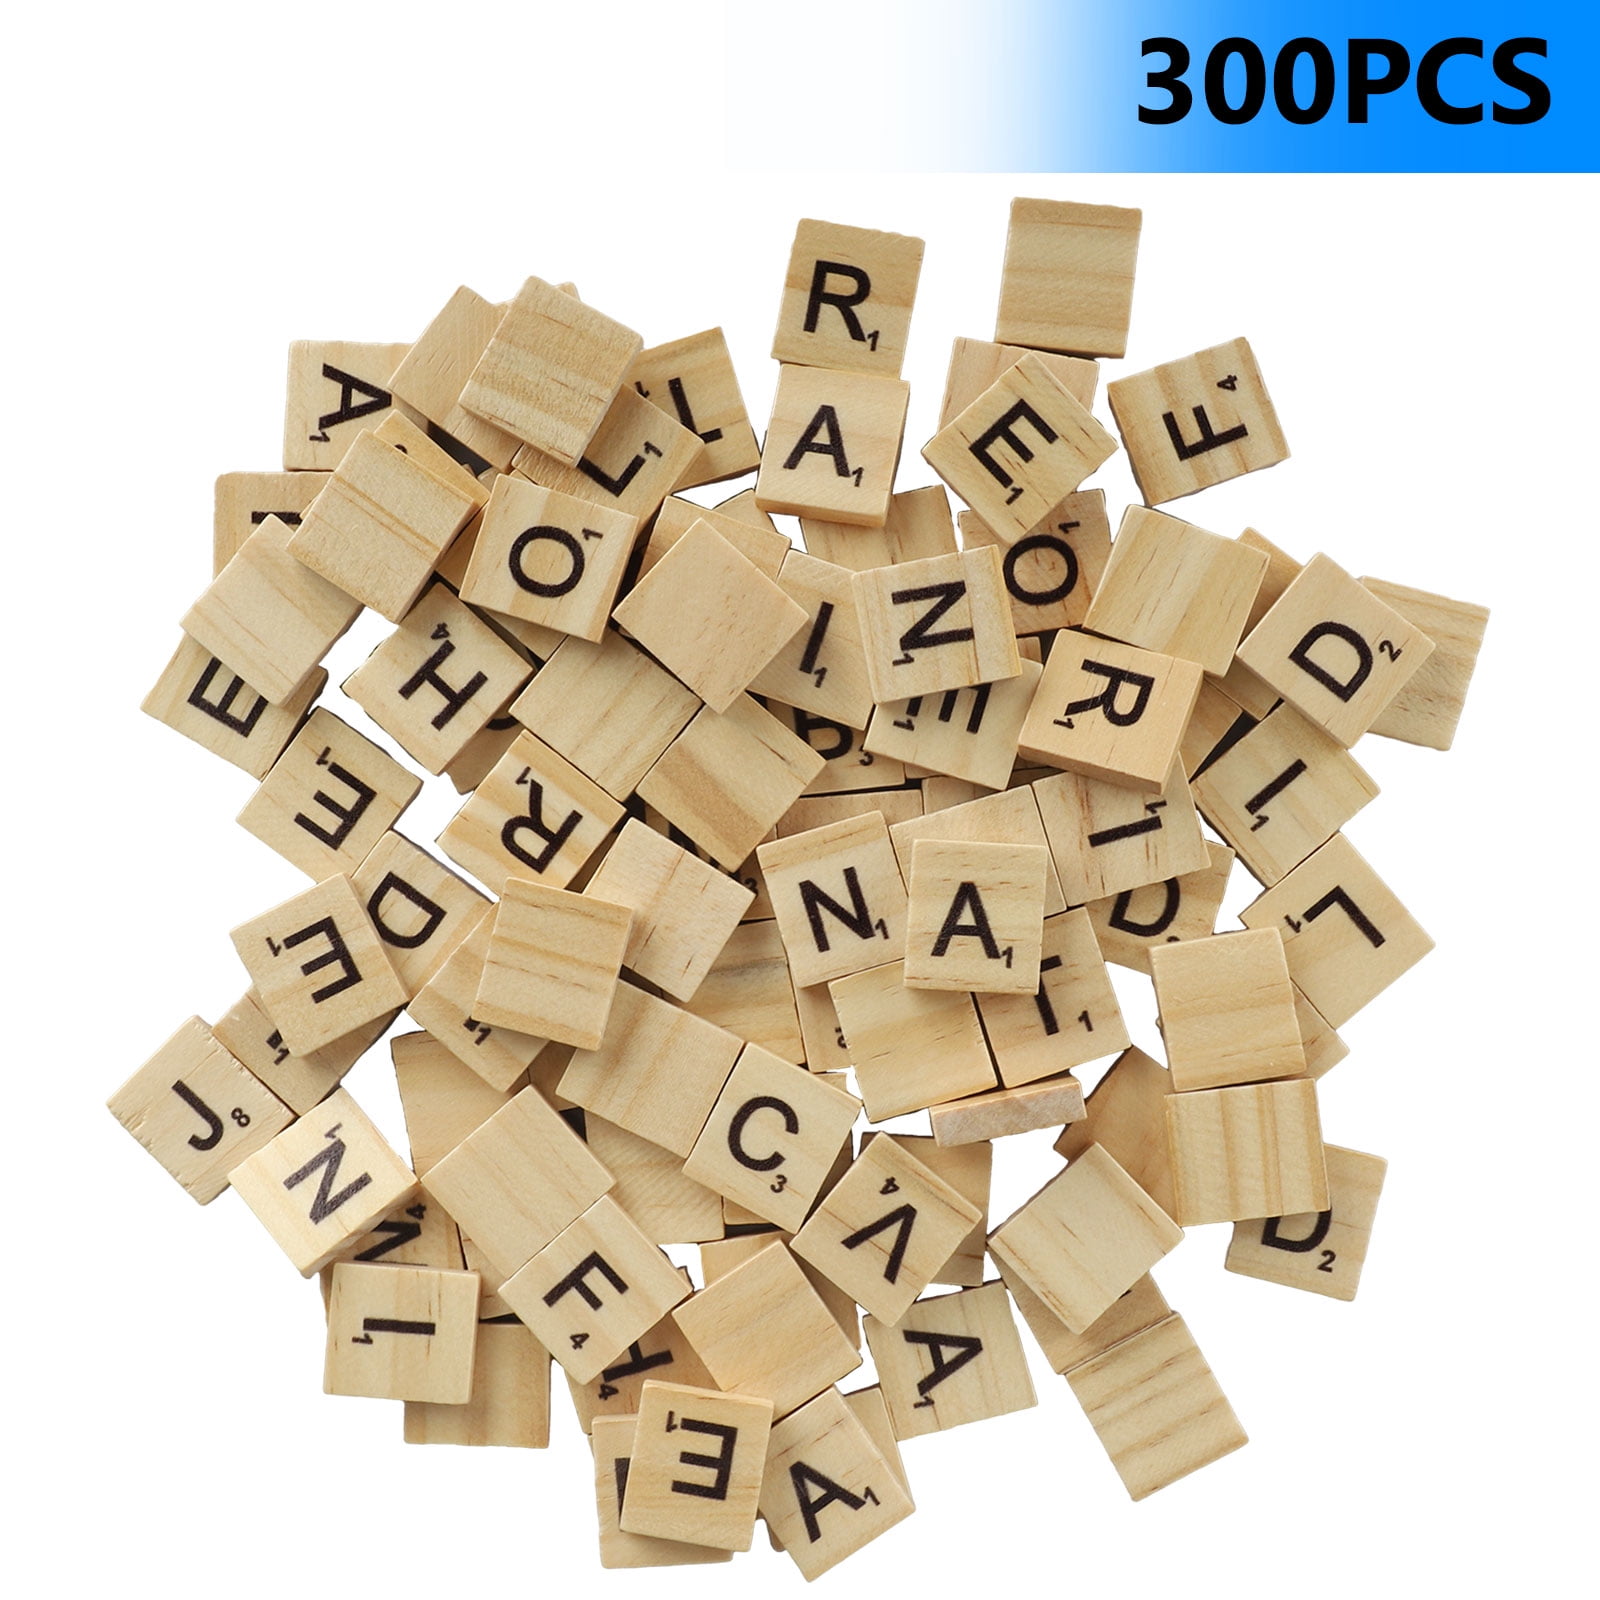 100x Mix Wooden Scrabble Tiles Letters Craft Alphabet Board Game Fun Toy Gift J